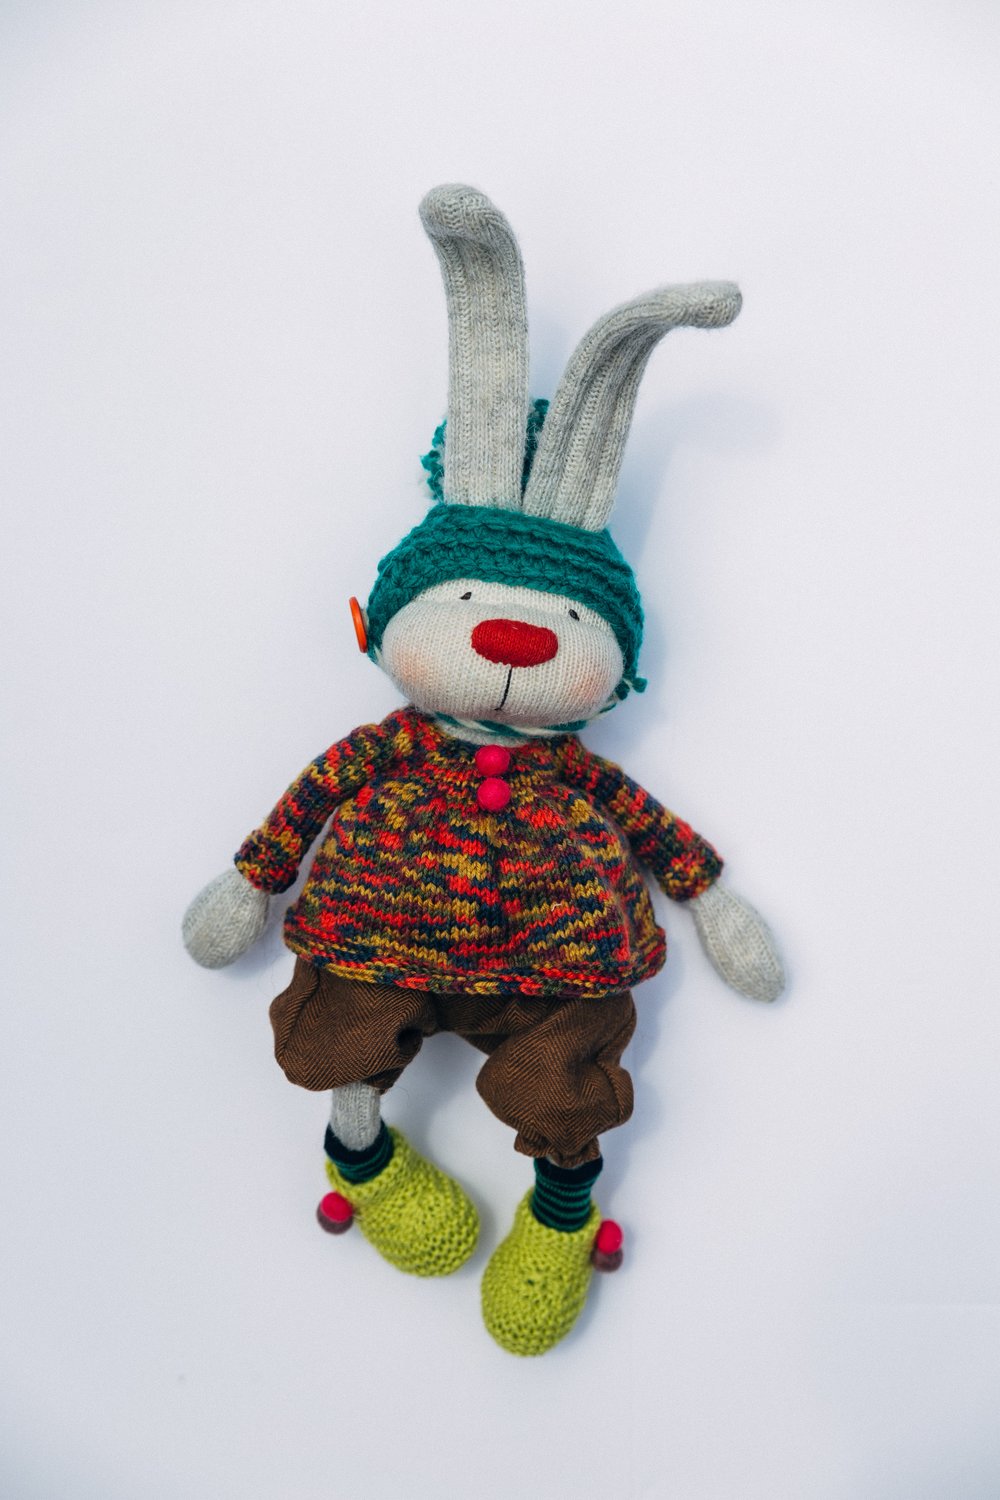 Image of Paisley - Wool Filled Sculpted Sock Bunny with removable knits, hat, shoes, socks, and pants